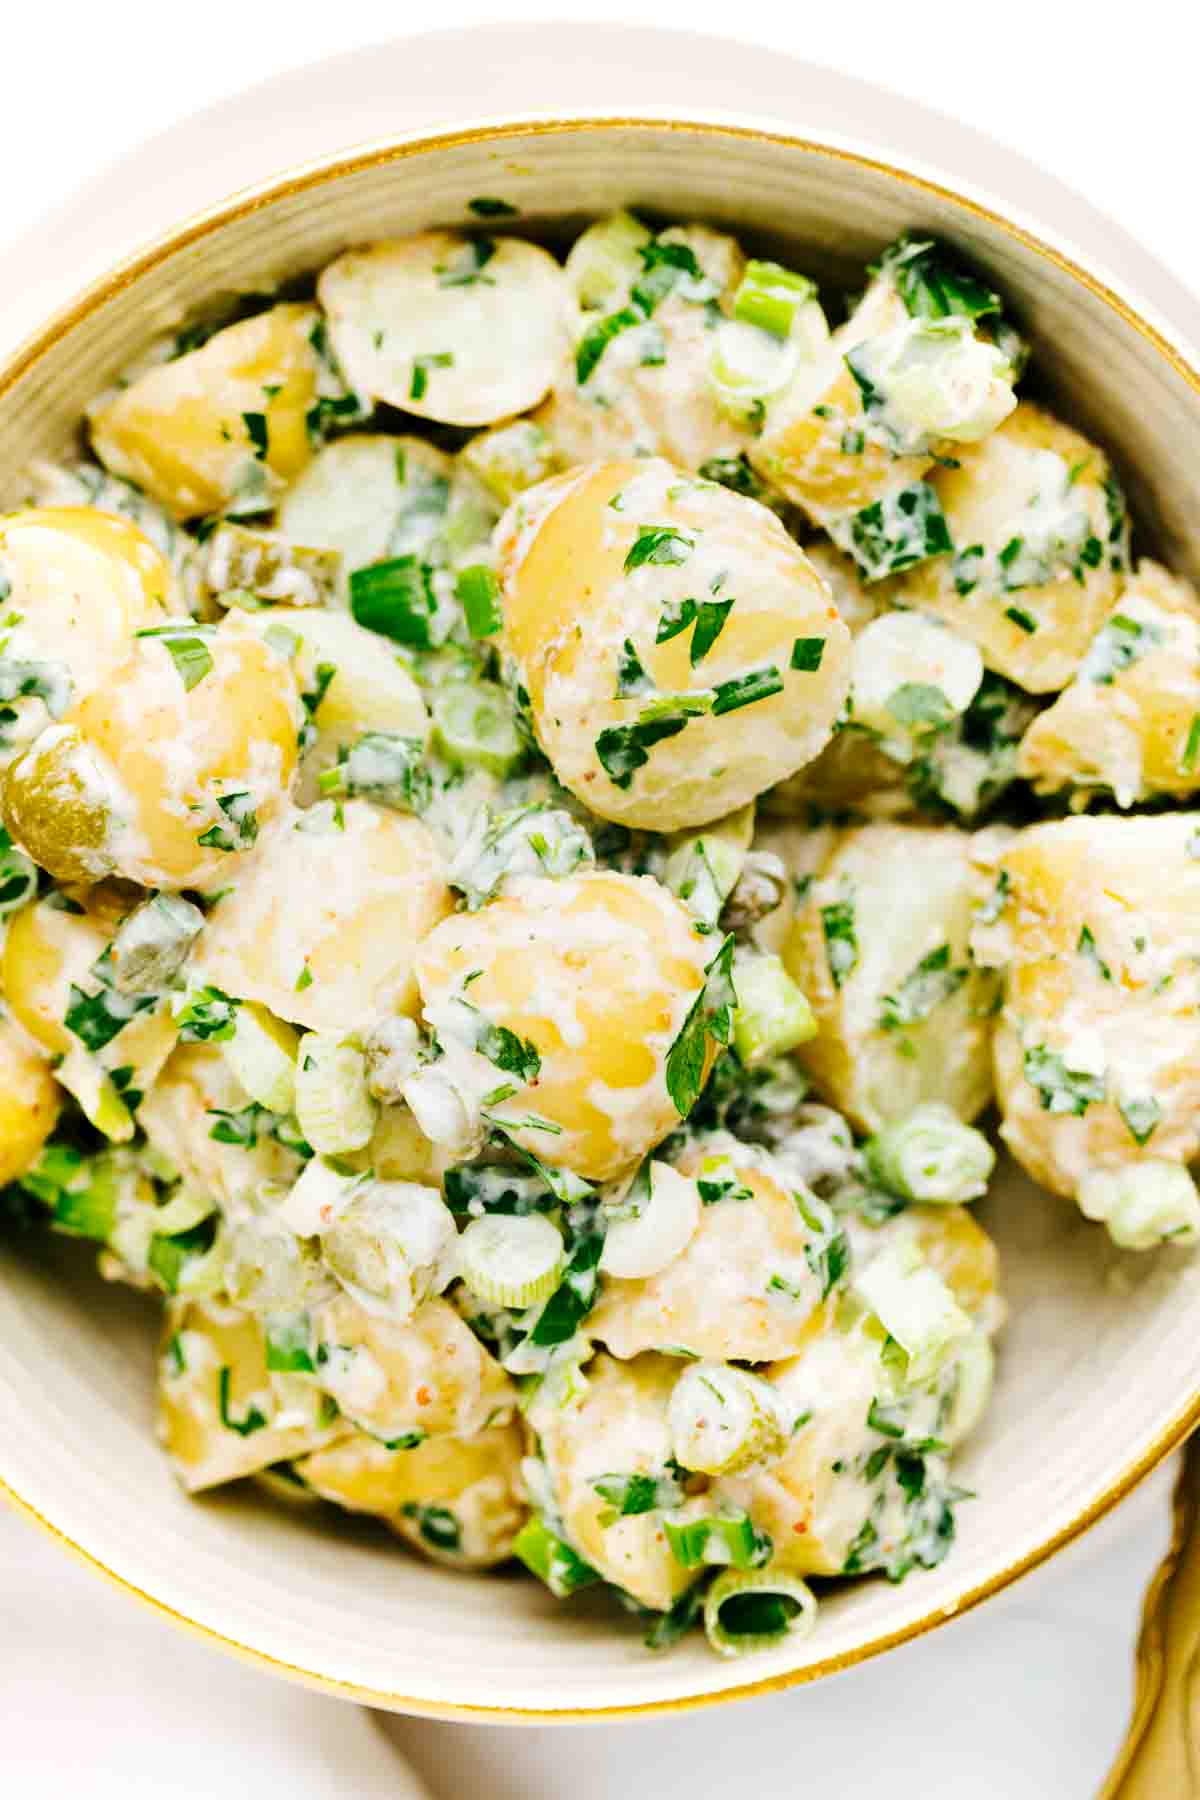 Potato salad with spring onions, herbs and a dressing in a round bowl.